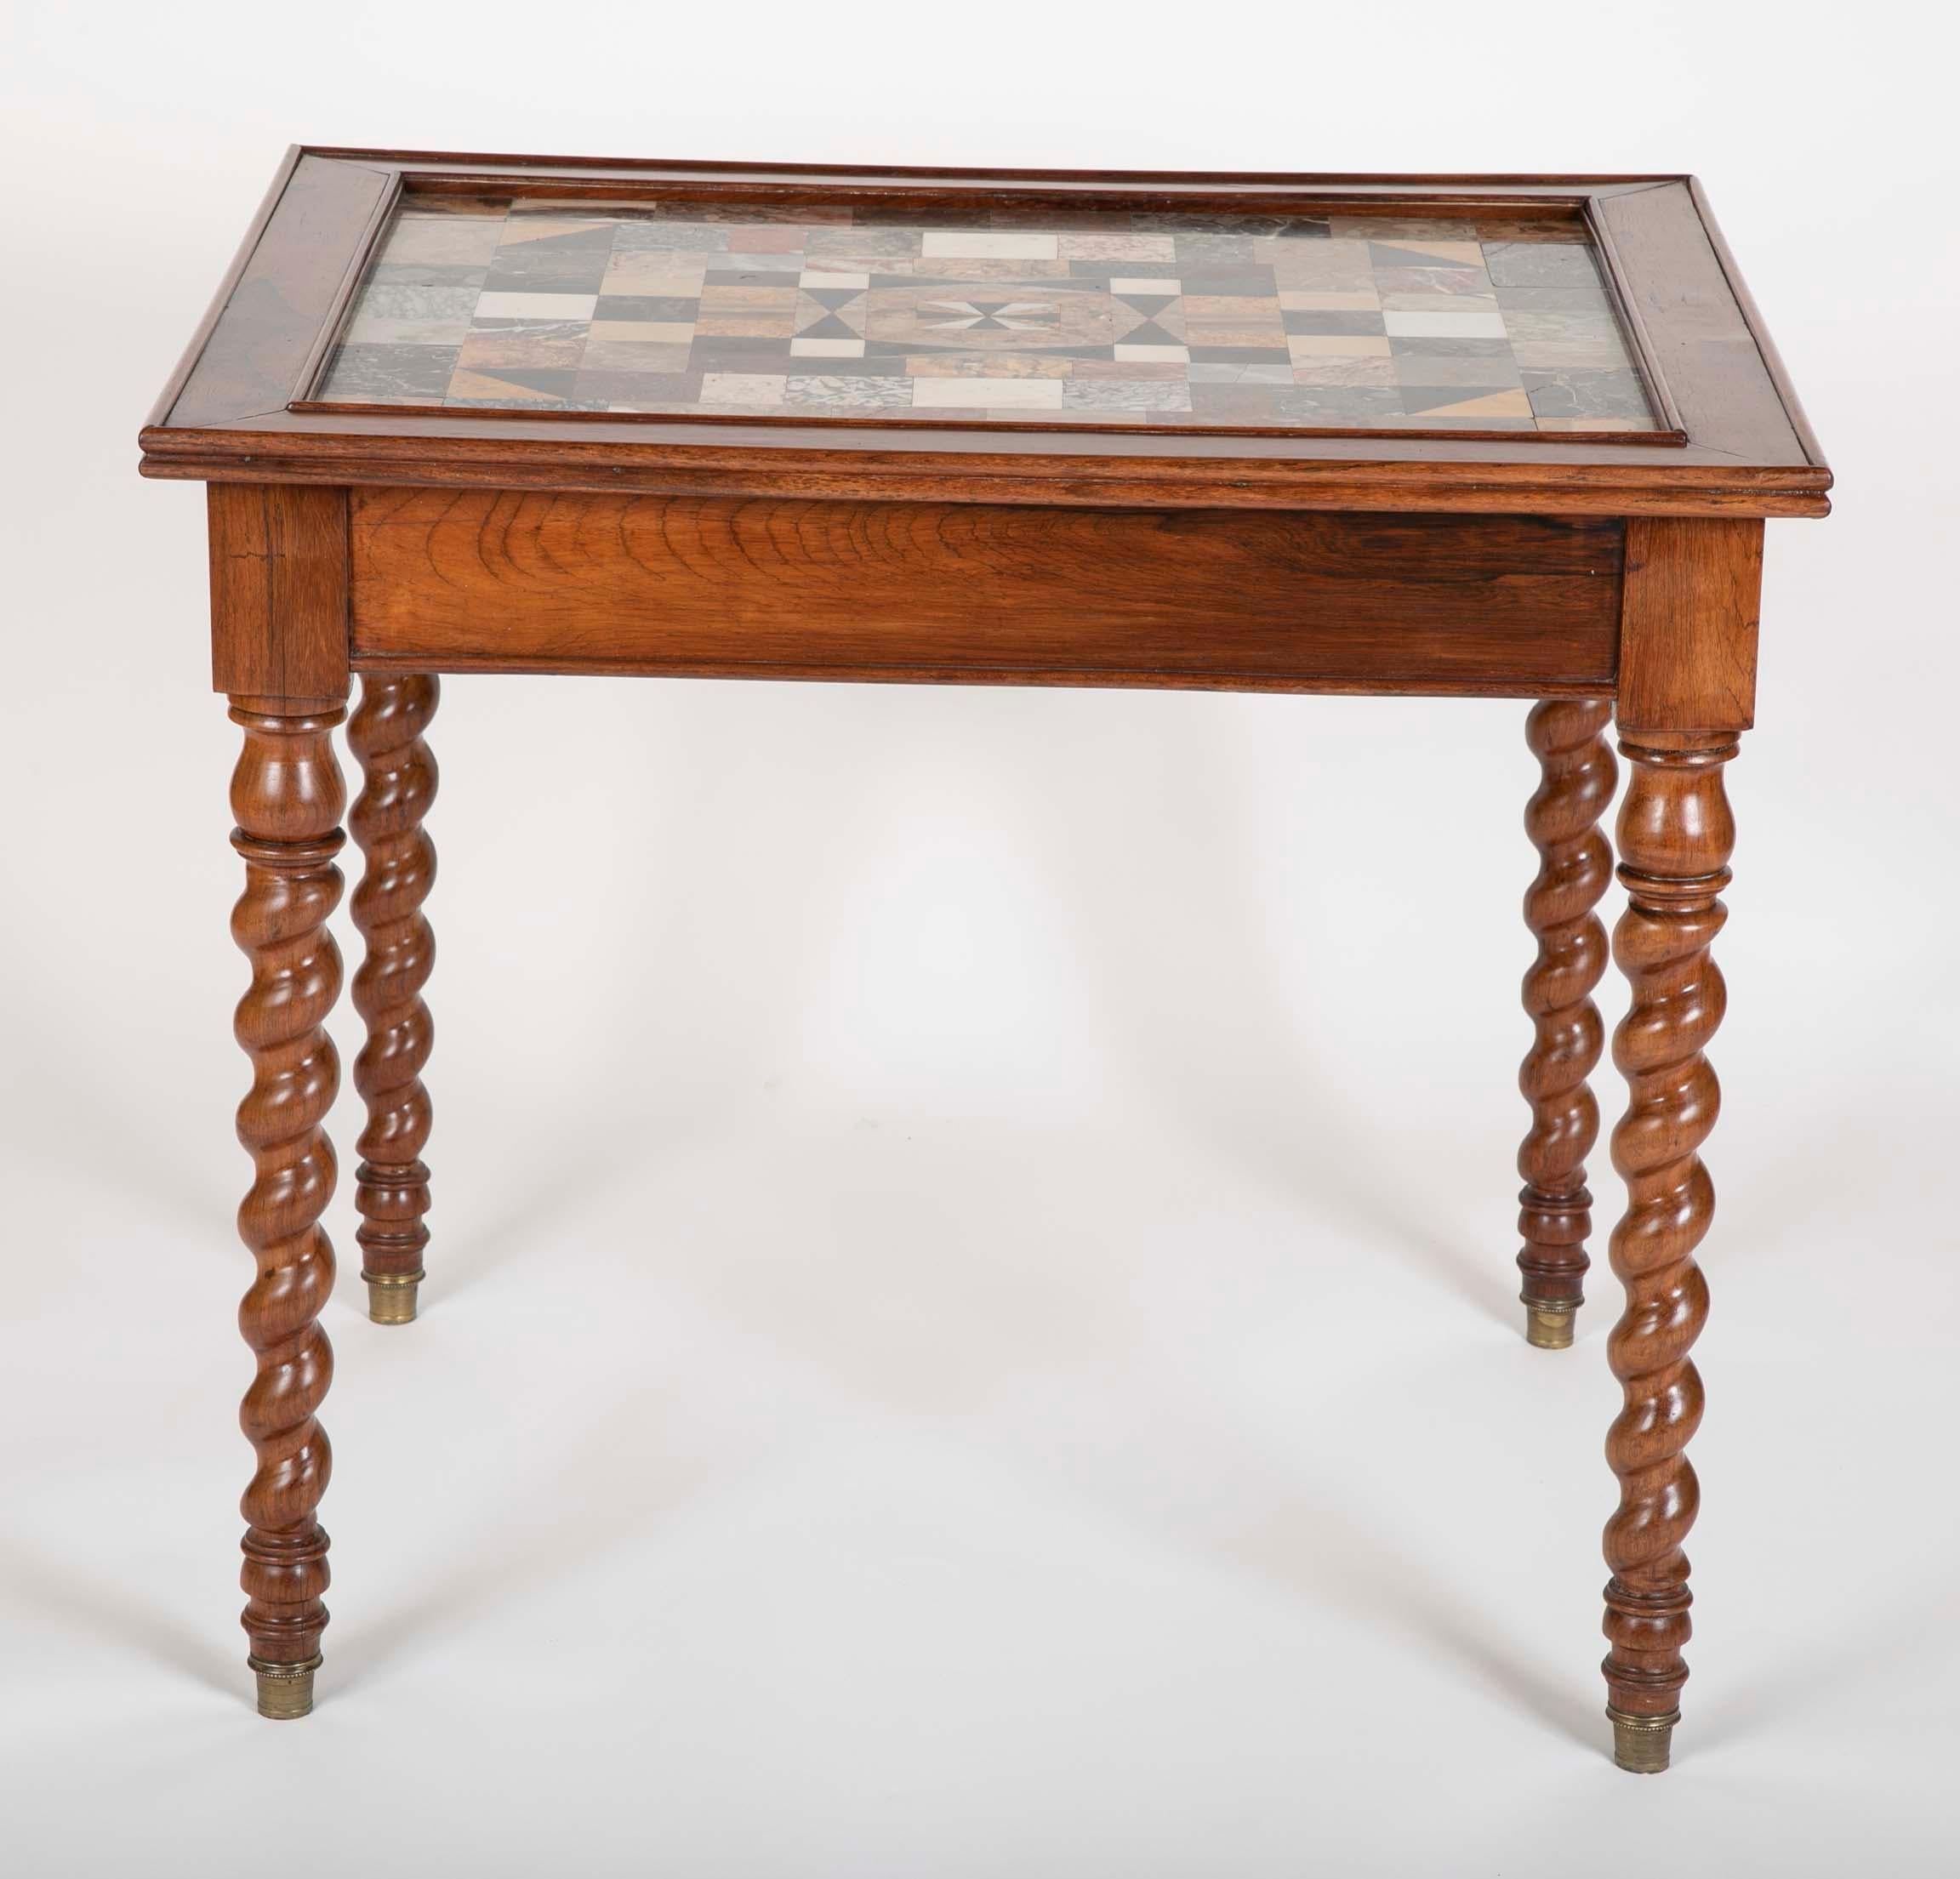 A rare French table having a thick specimen marble top inset sitting on four barley twist legs.